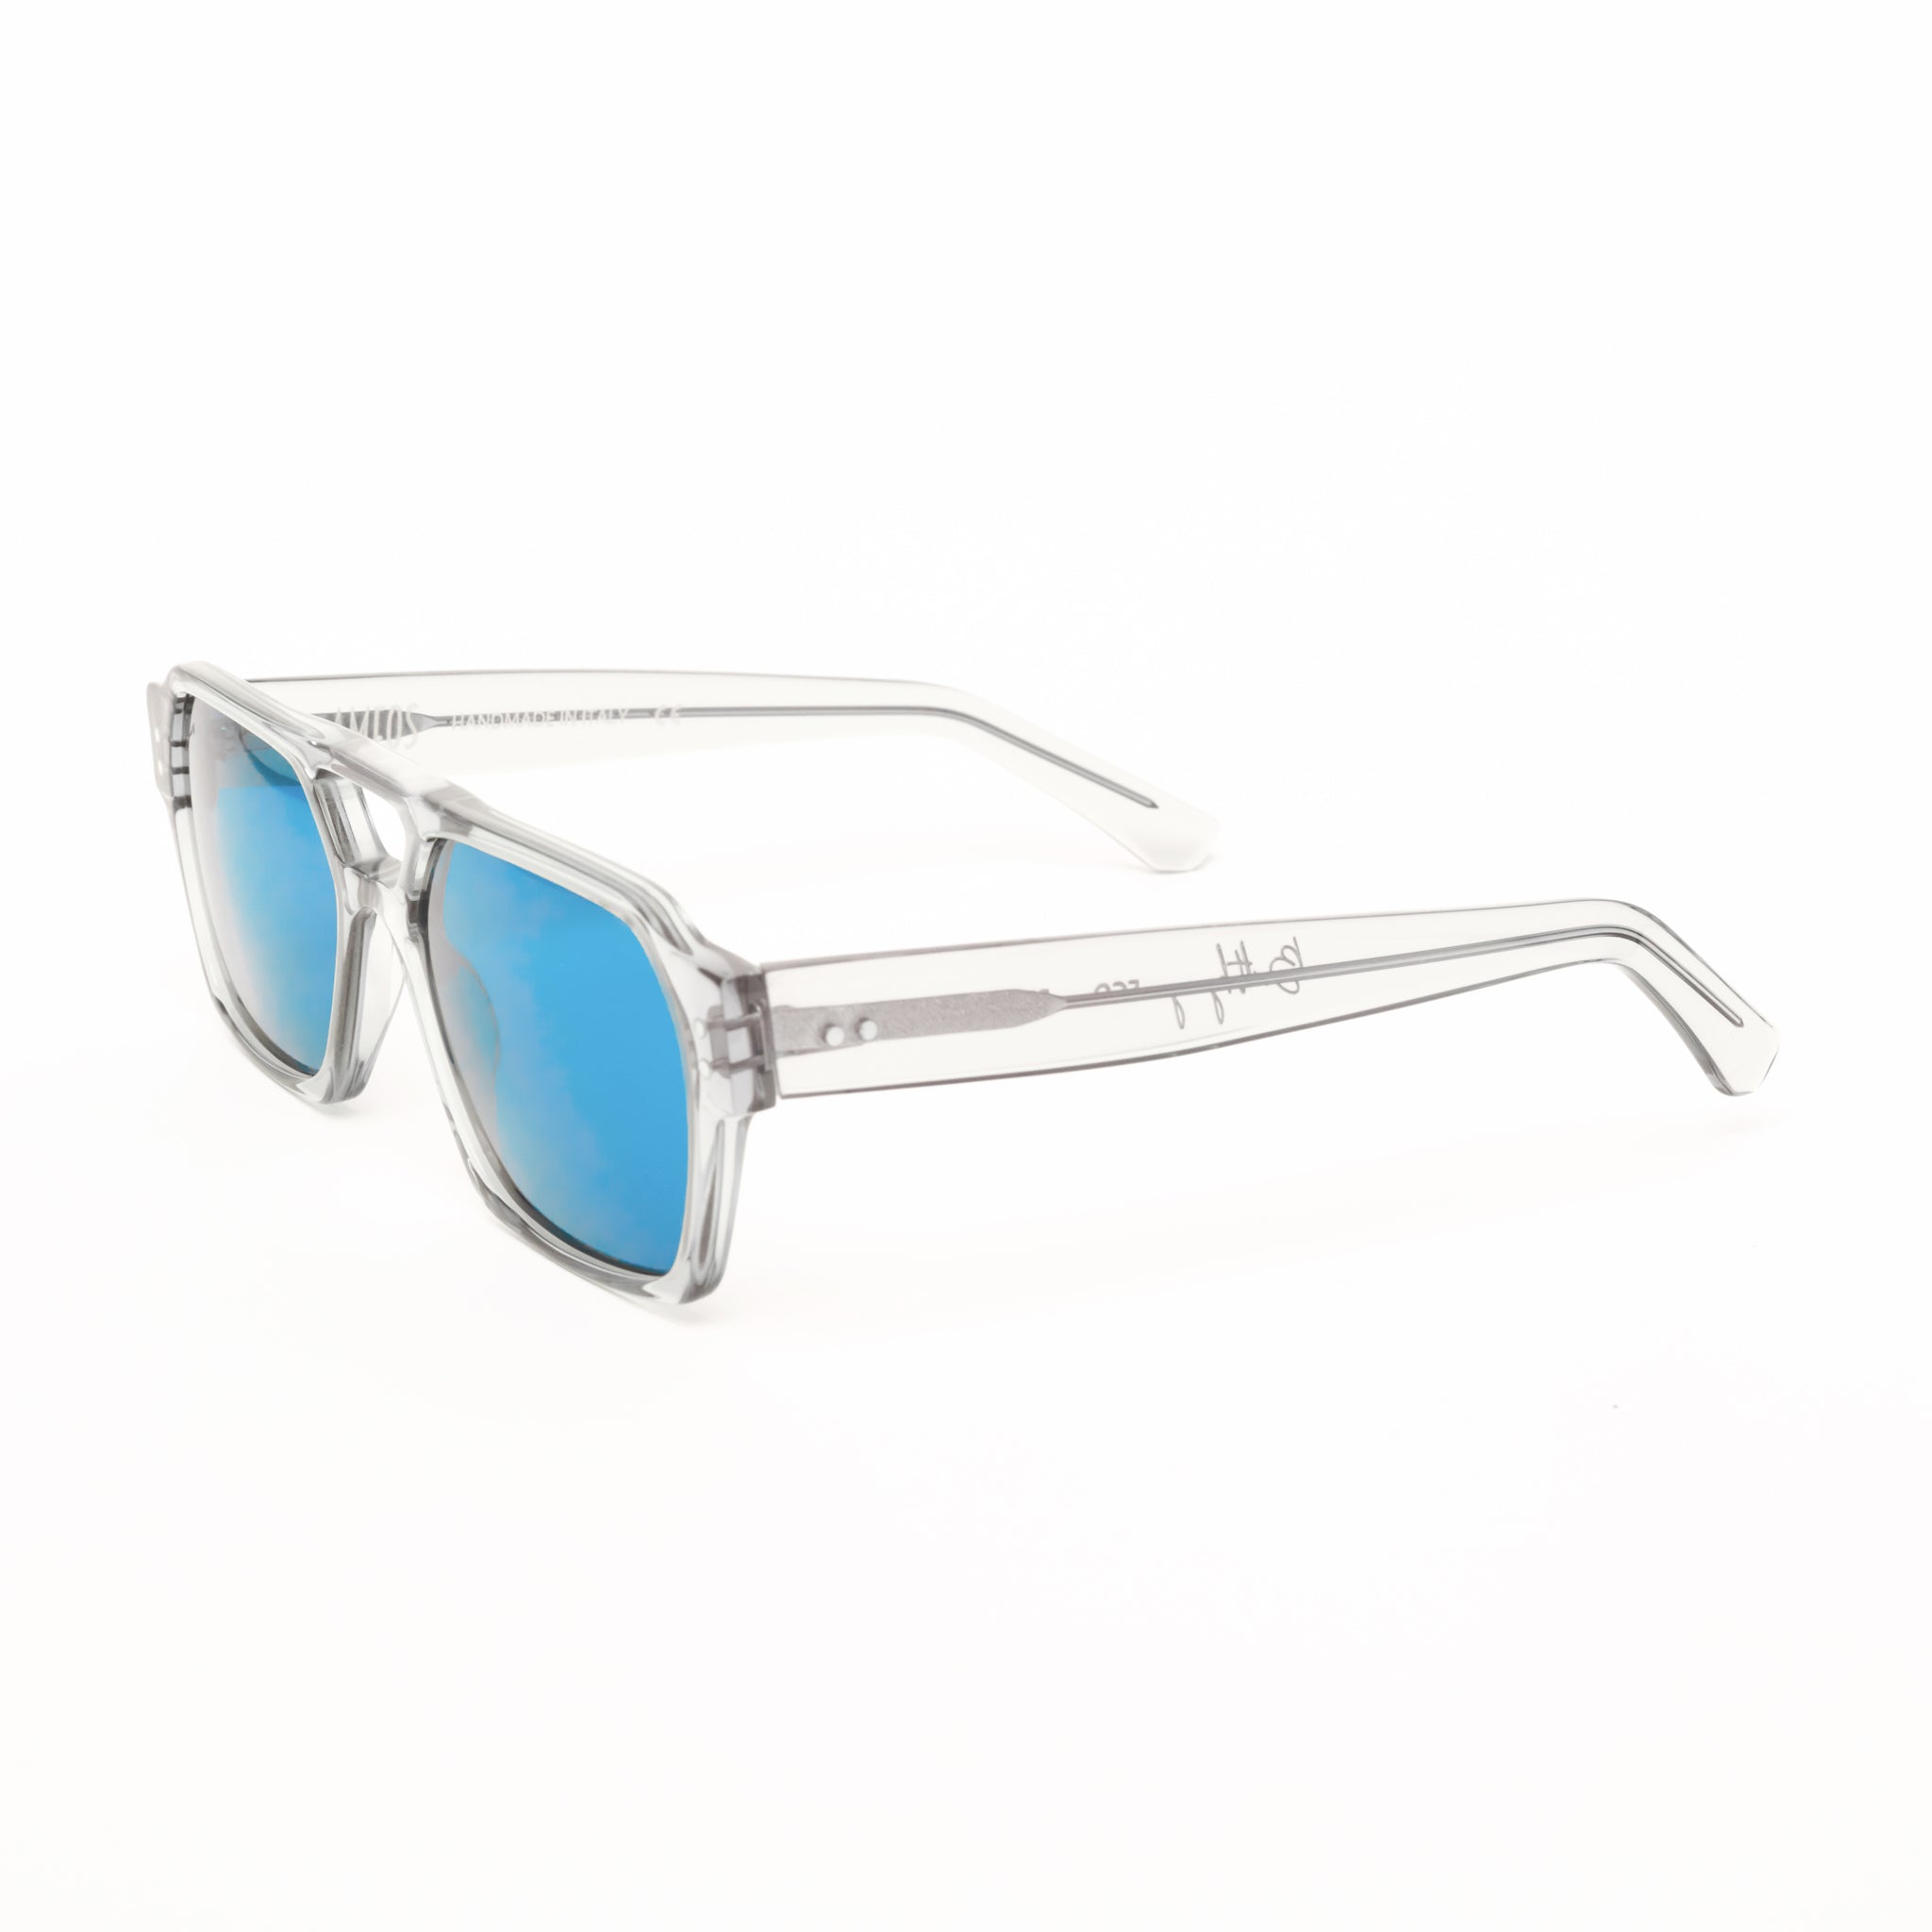 Ameos Identity collection Ego model. Transparent grey frames with blue lenses. Side view. Genderless, gender neutral eyewear